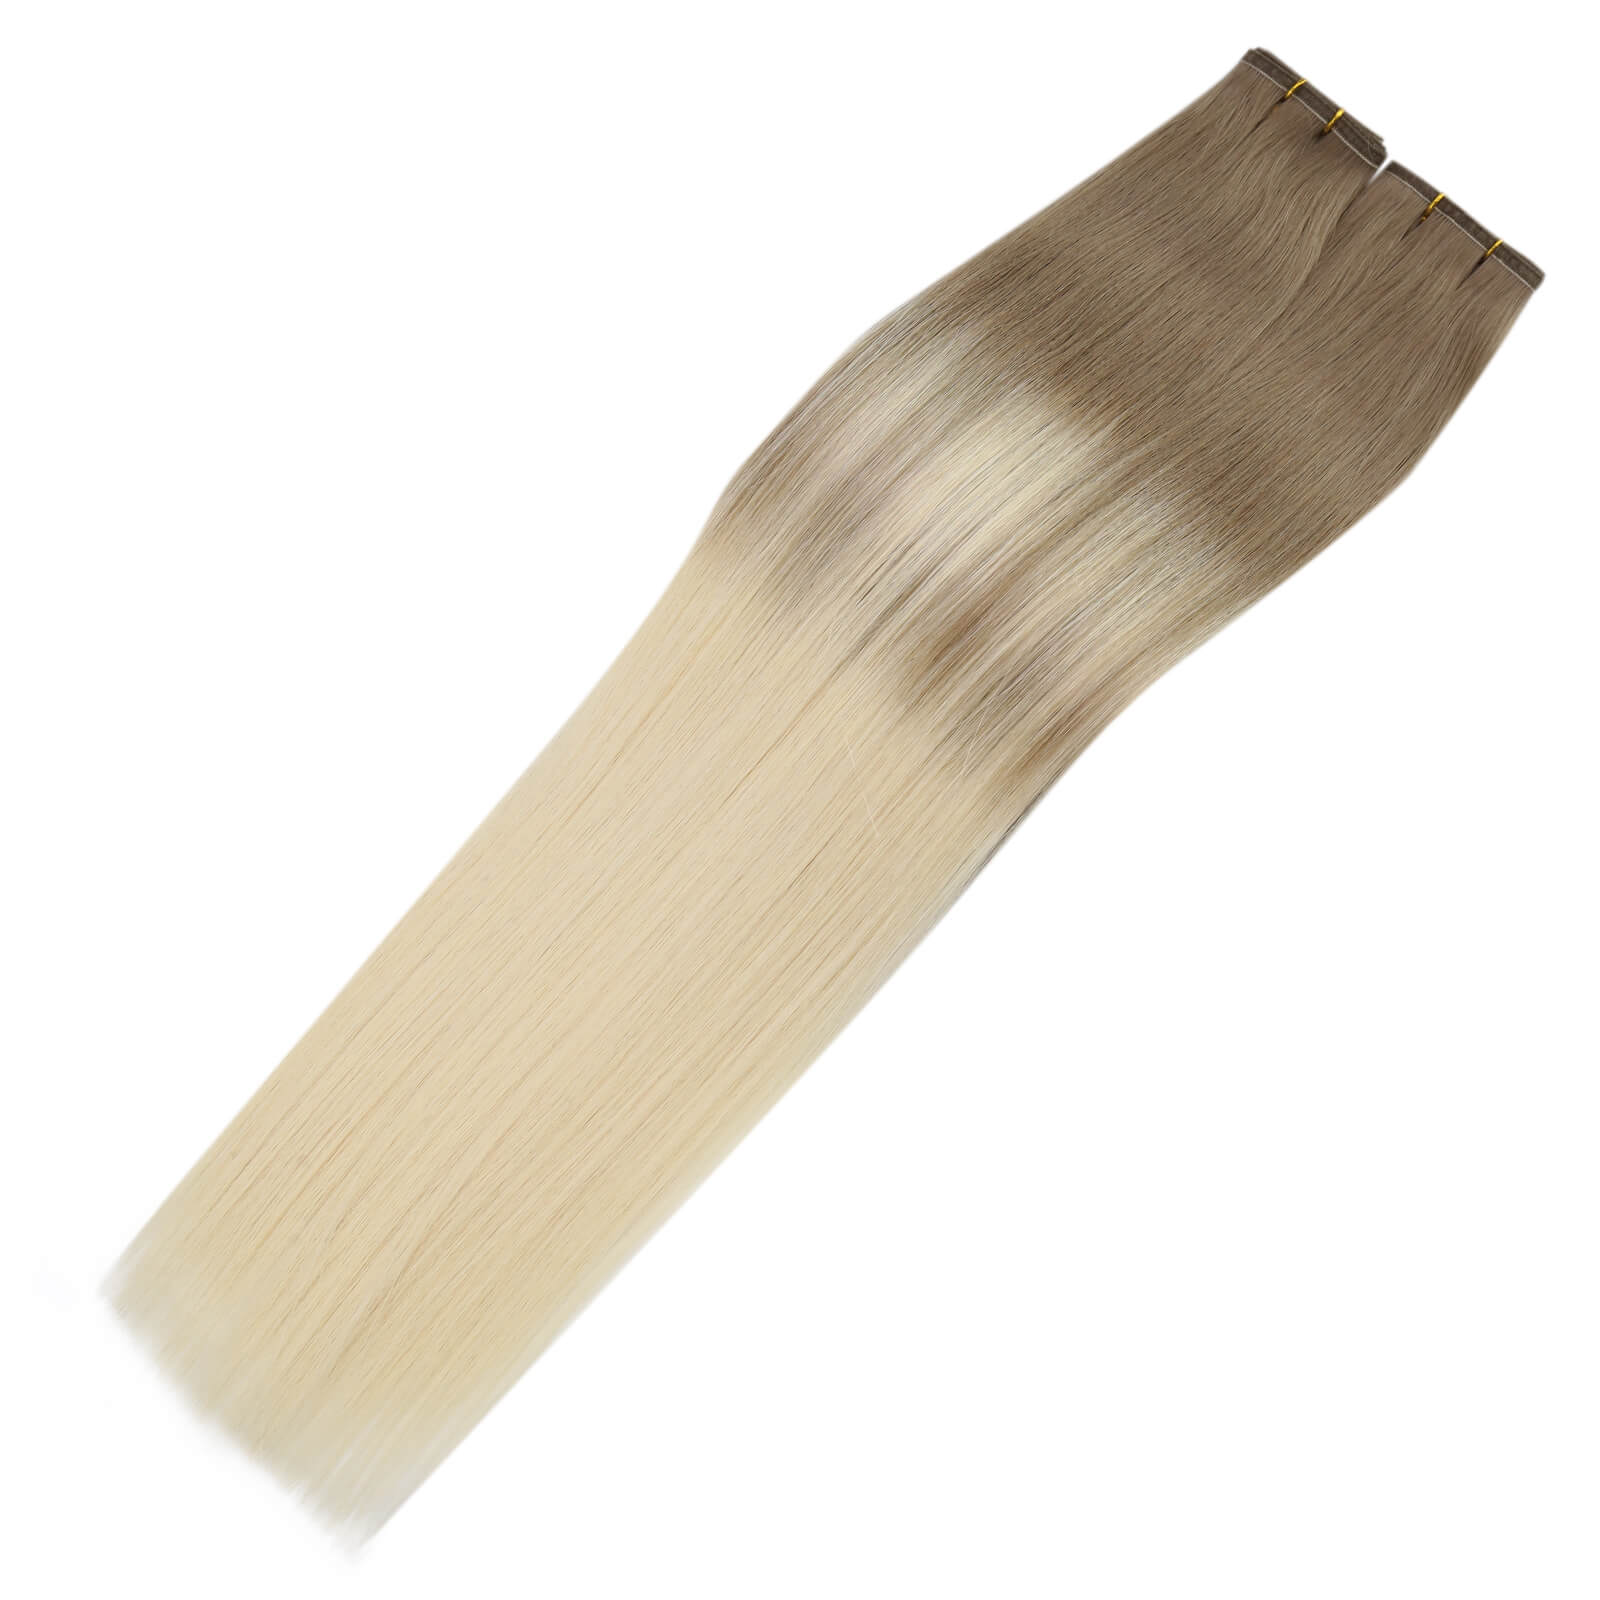 sunny hair flat track weave extensions, sunny hair flat track weft extensions, sunny hair Flat weft, flat weft hair